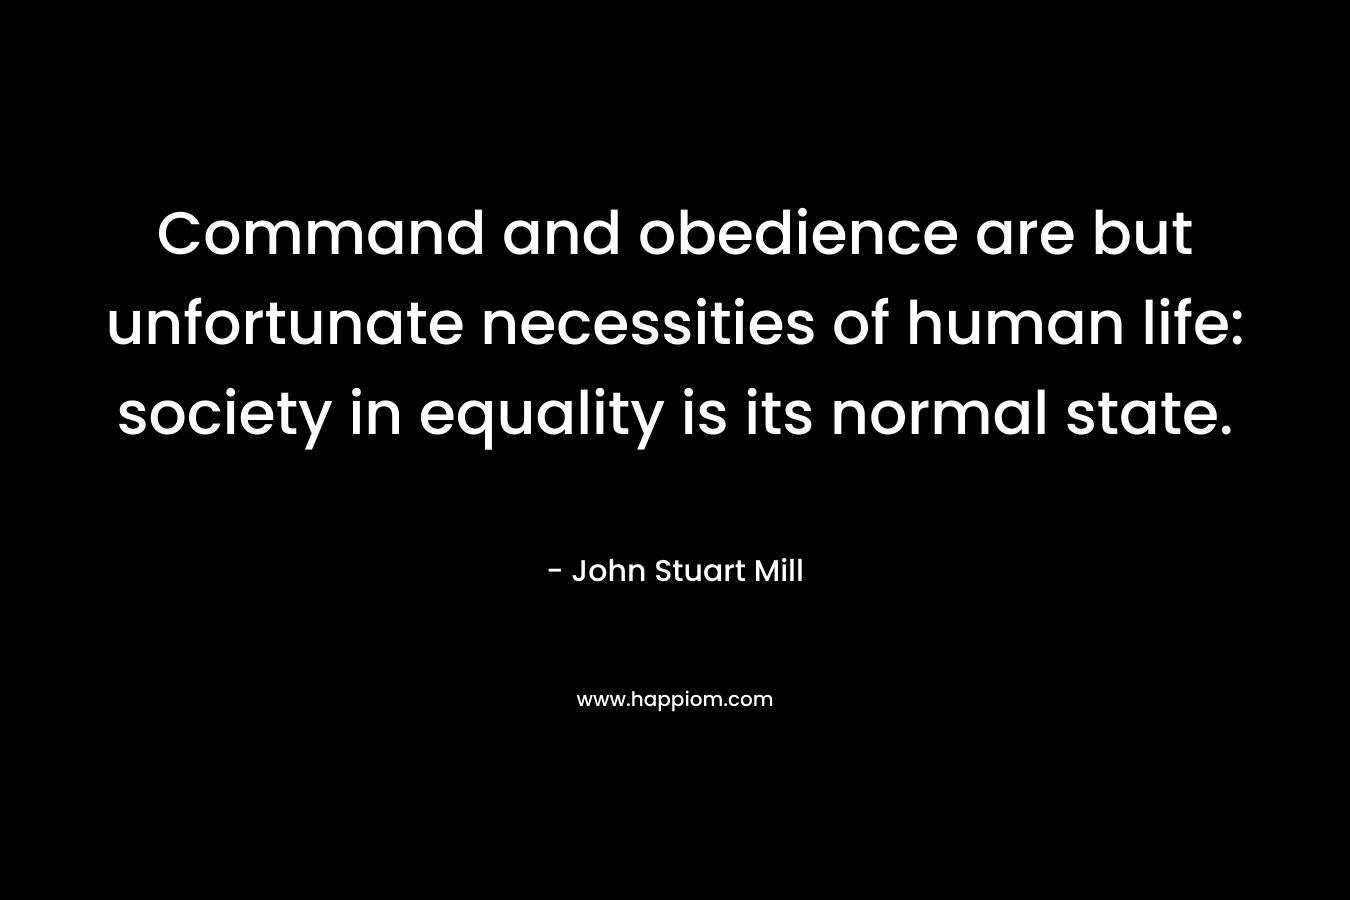 Command and obedience are but unfortunate necessities of human life: society in equality is its normal state. – John Stuart Mill